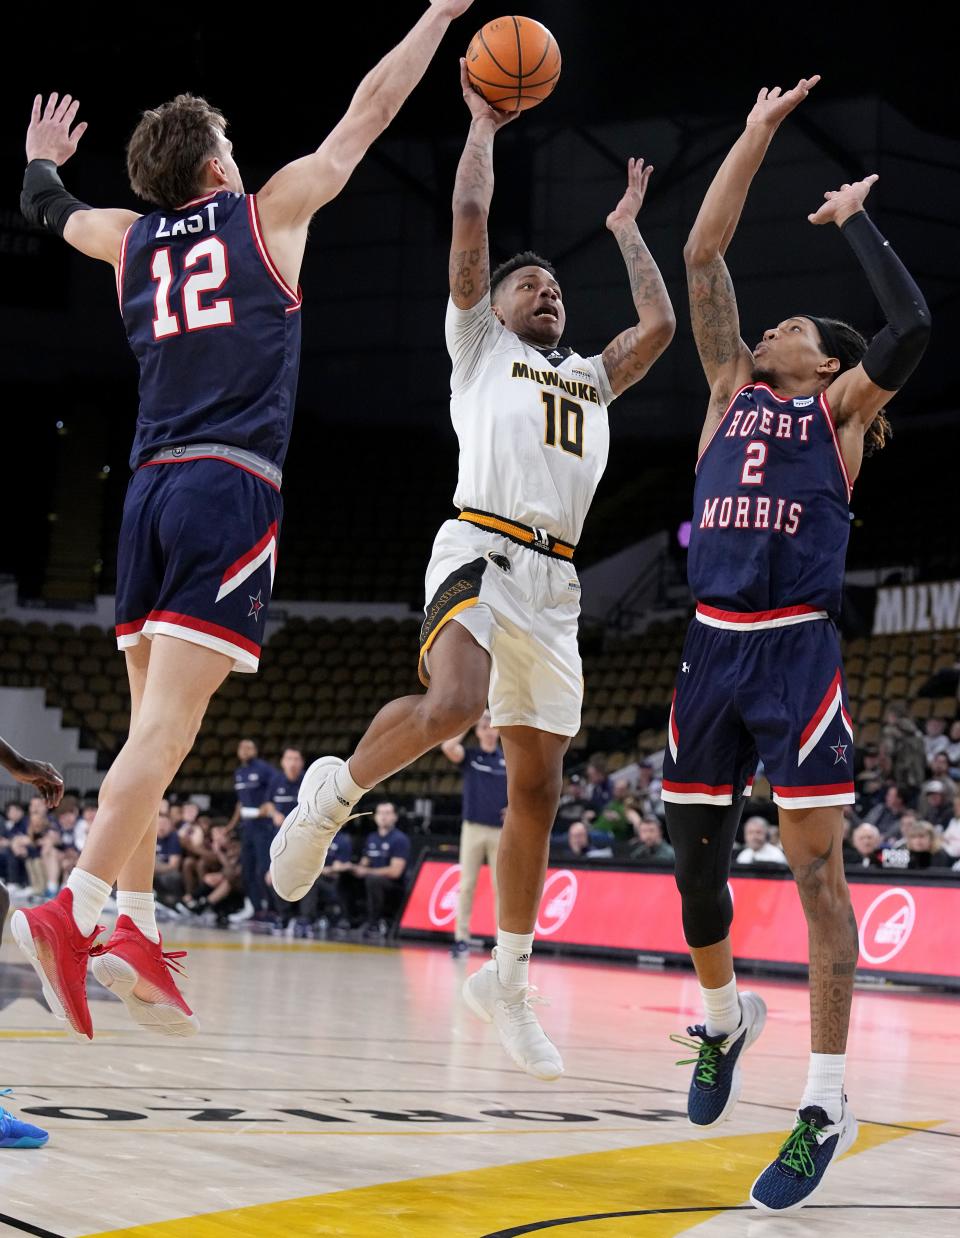 BJ Freeman (pictured here on Jan. 19) had a career game with 30 points, 11 assists and six rebounds to lead UWM past Youngstown State, 88-75, on Saturday night.